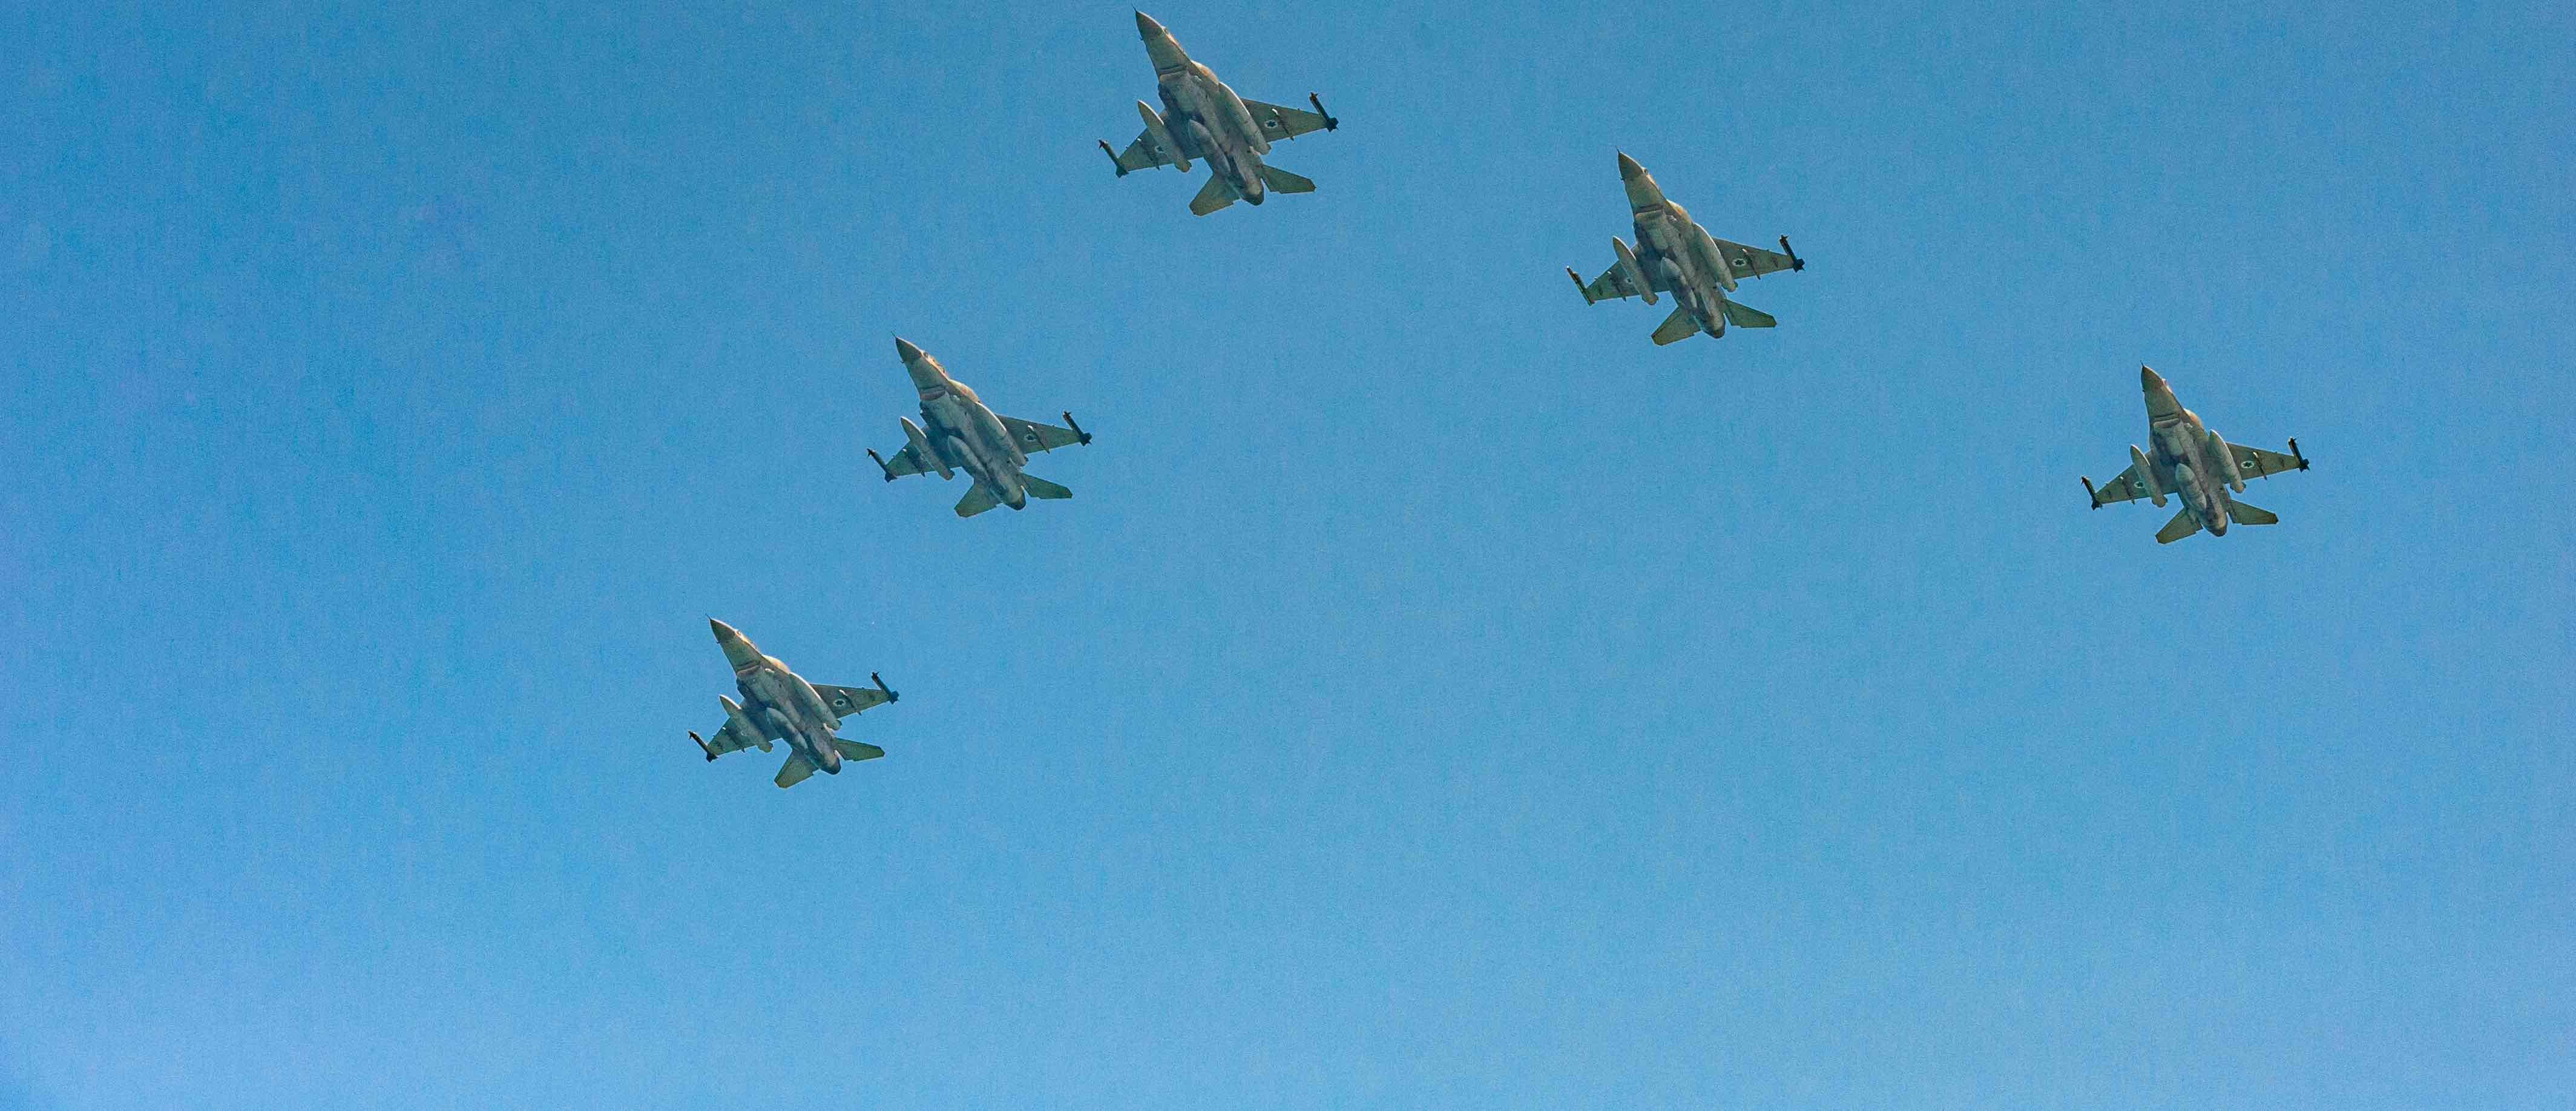 Fighters at a Tel Aviv air show in 2016 (Photo: Michael Jacobs/Getty)